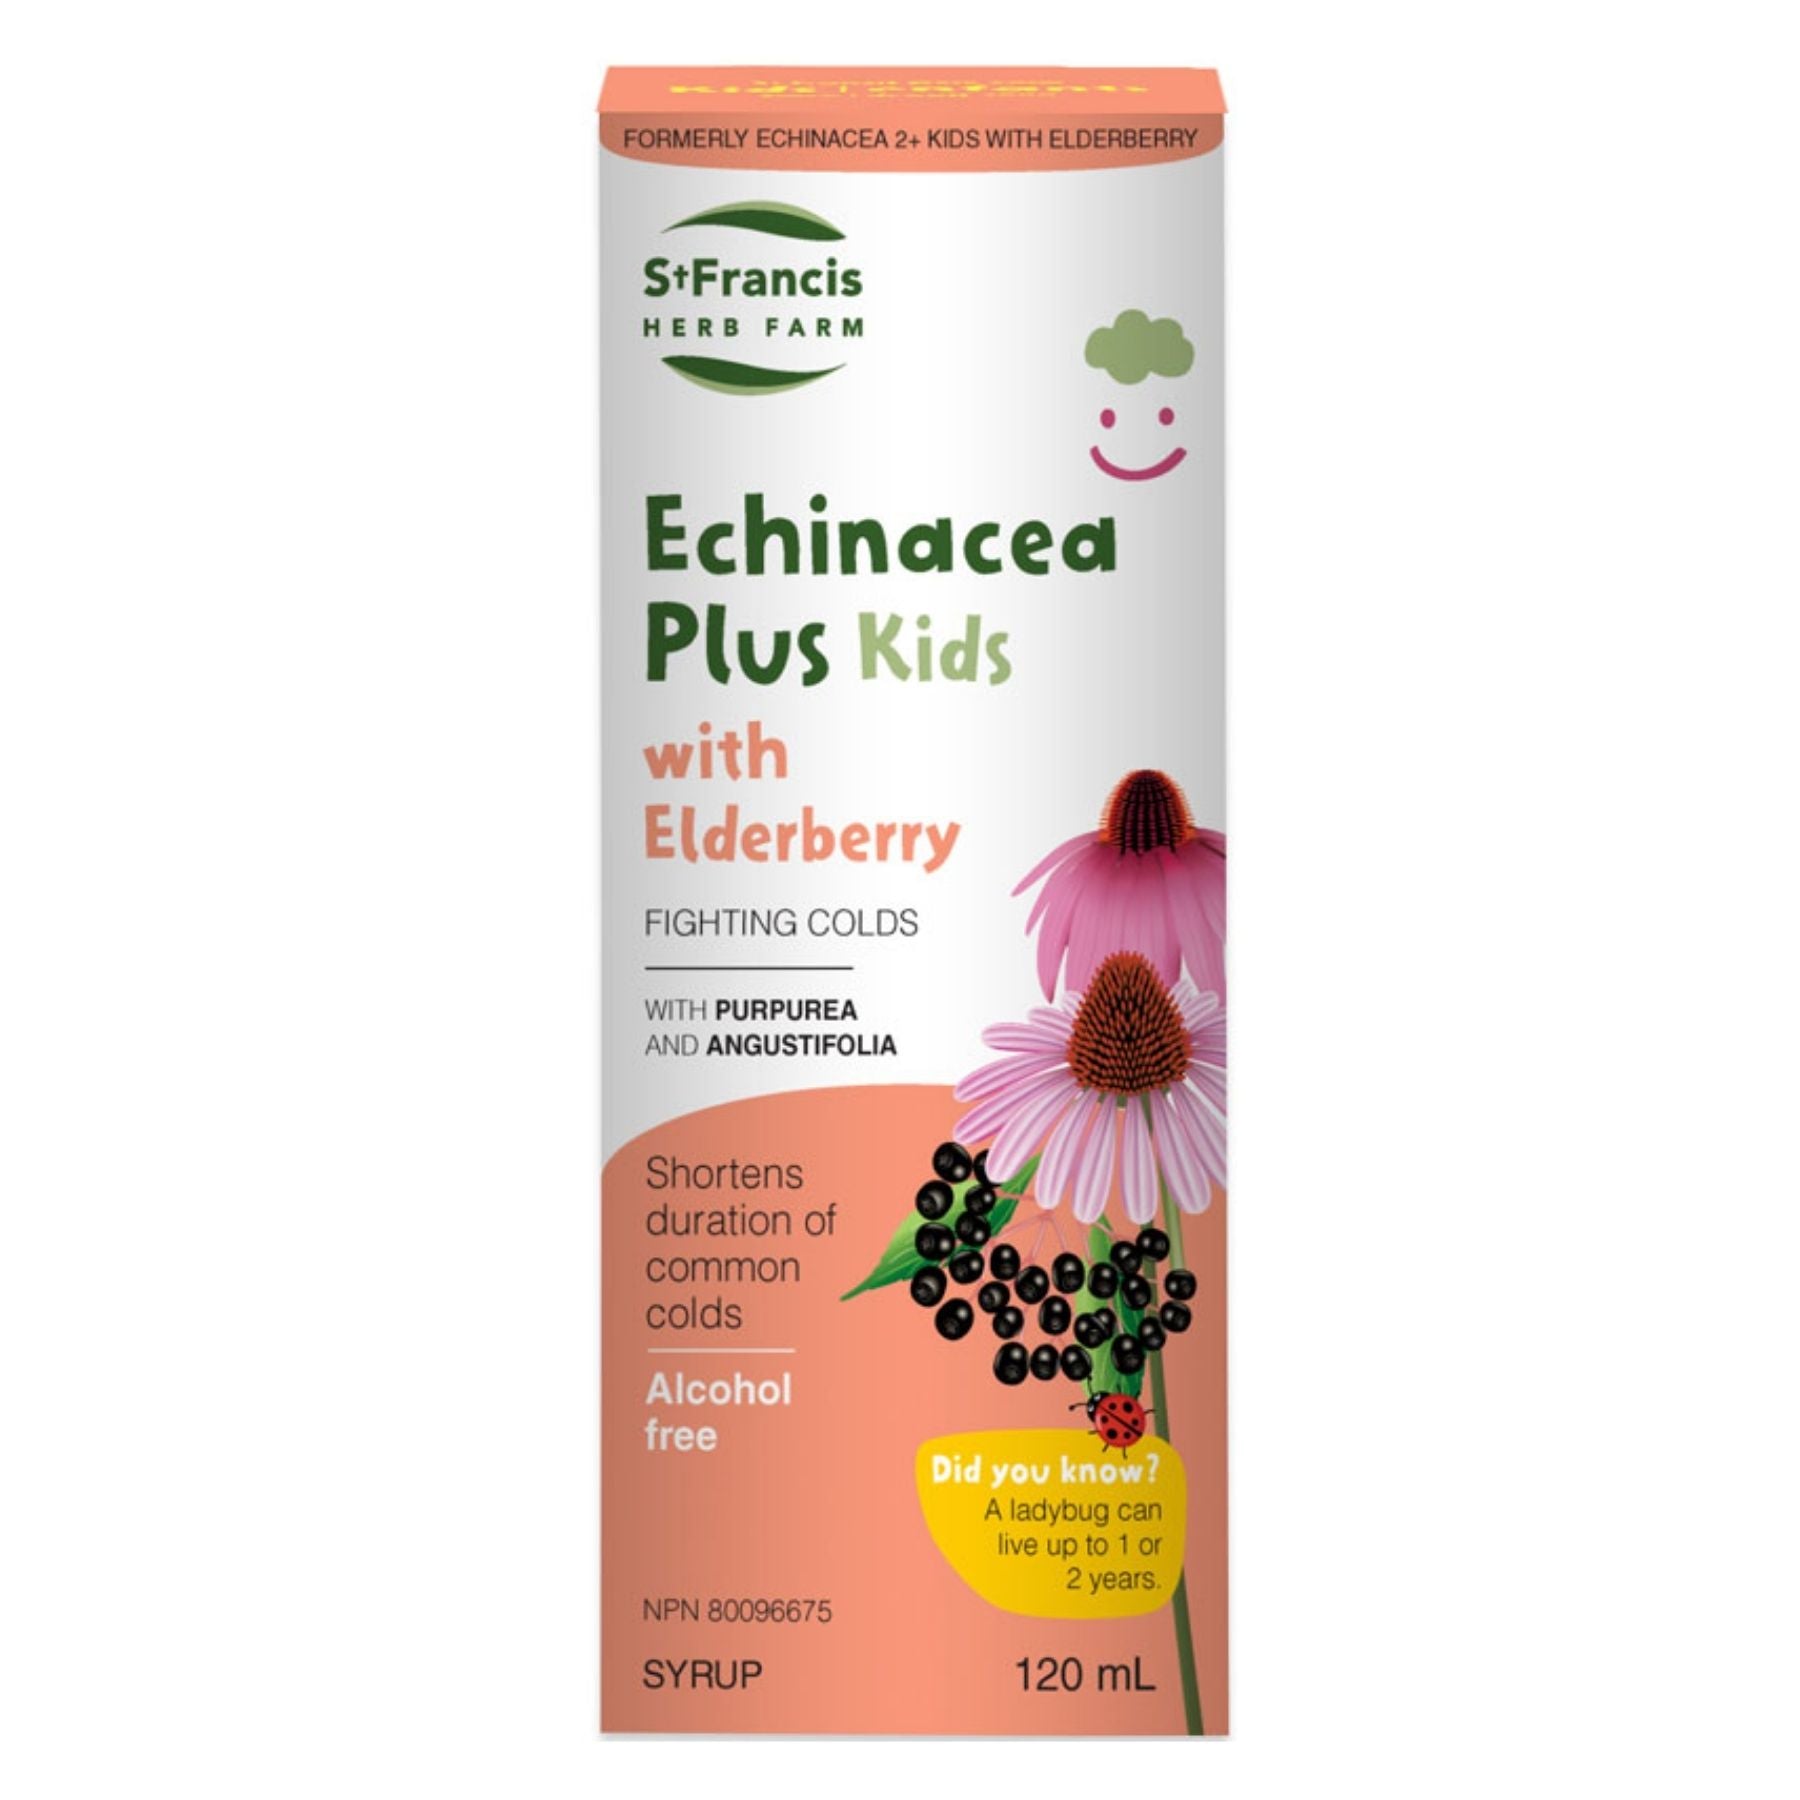 St Francis Echinacea Plus for Kids formulated with Elderberry - An alcohol free cough syrup to help shorten the duration of common colds - 120mL bottle. 